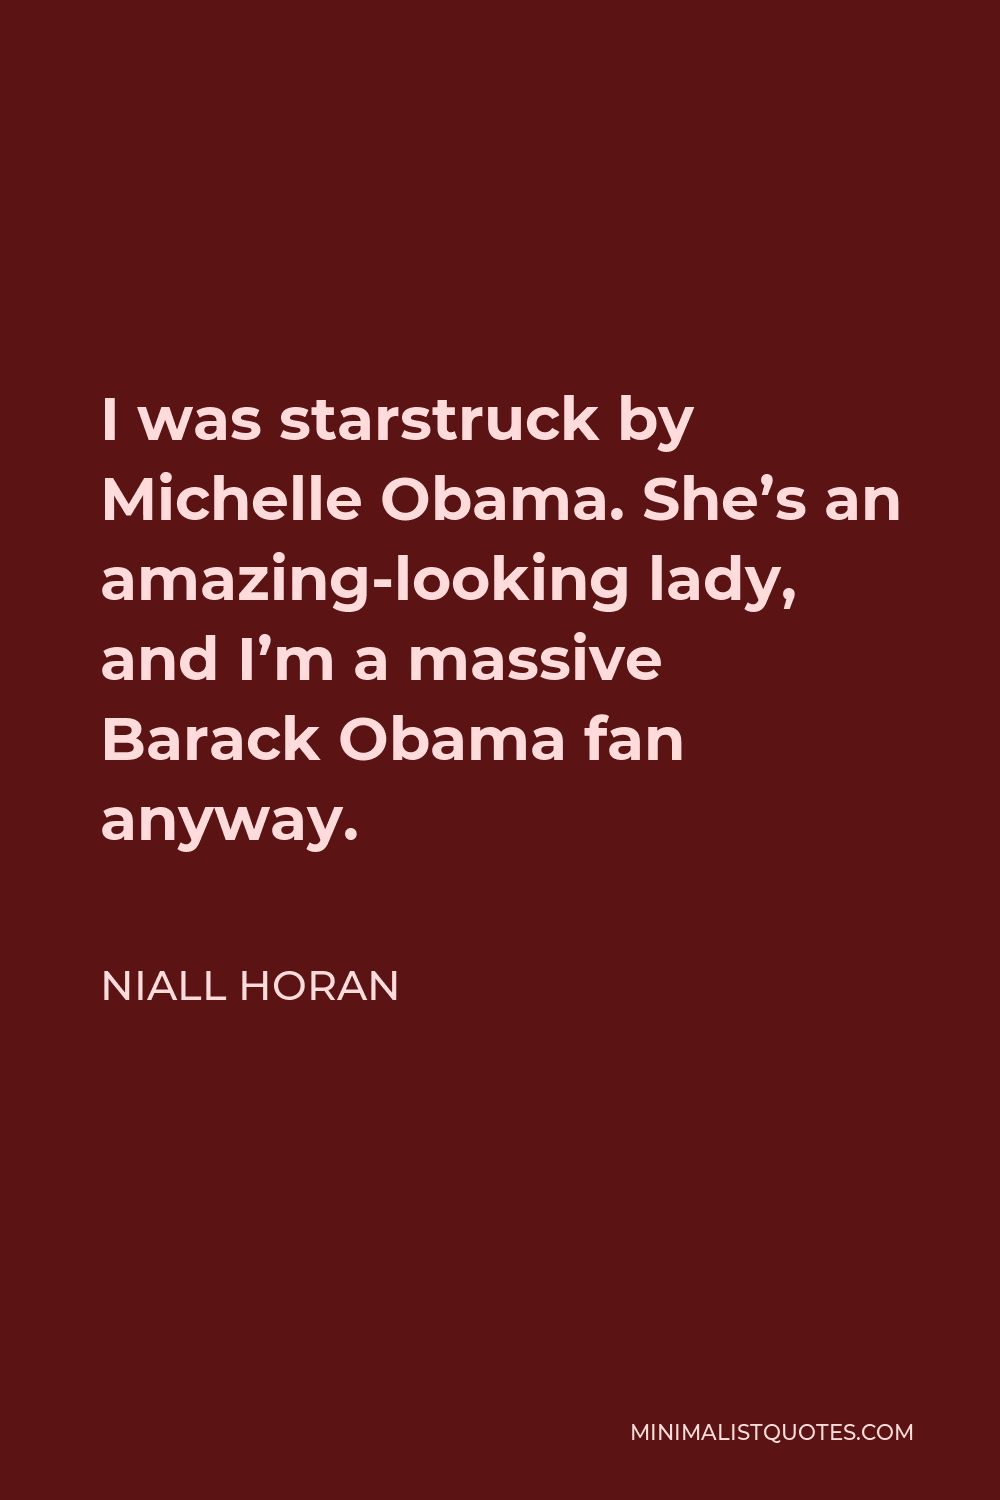 Niall Horan Quote - I was starstruck by Michelle Obama. She’s an amazing-looking lady, and I’m a massive Barack Obama fan anyway.